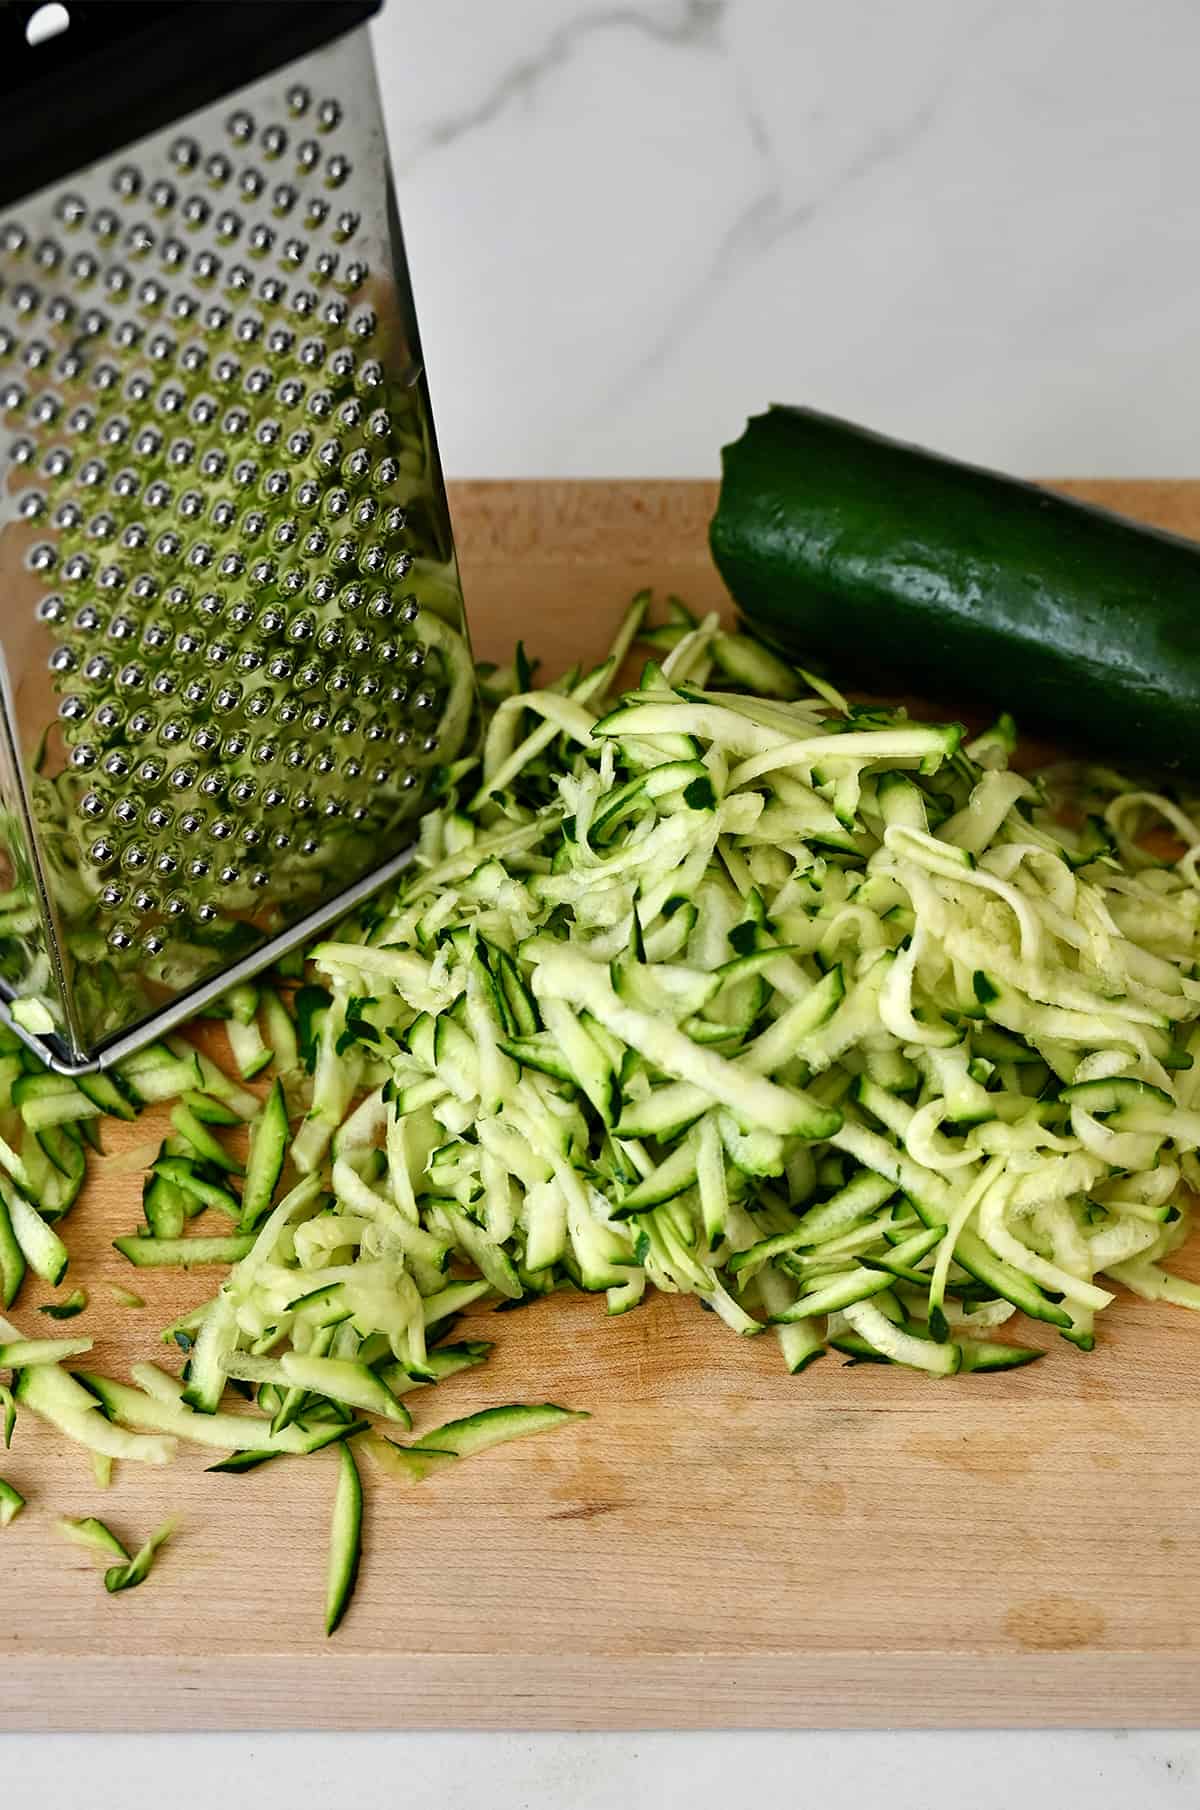 Shredded zucchini next to a box grater.